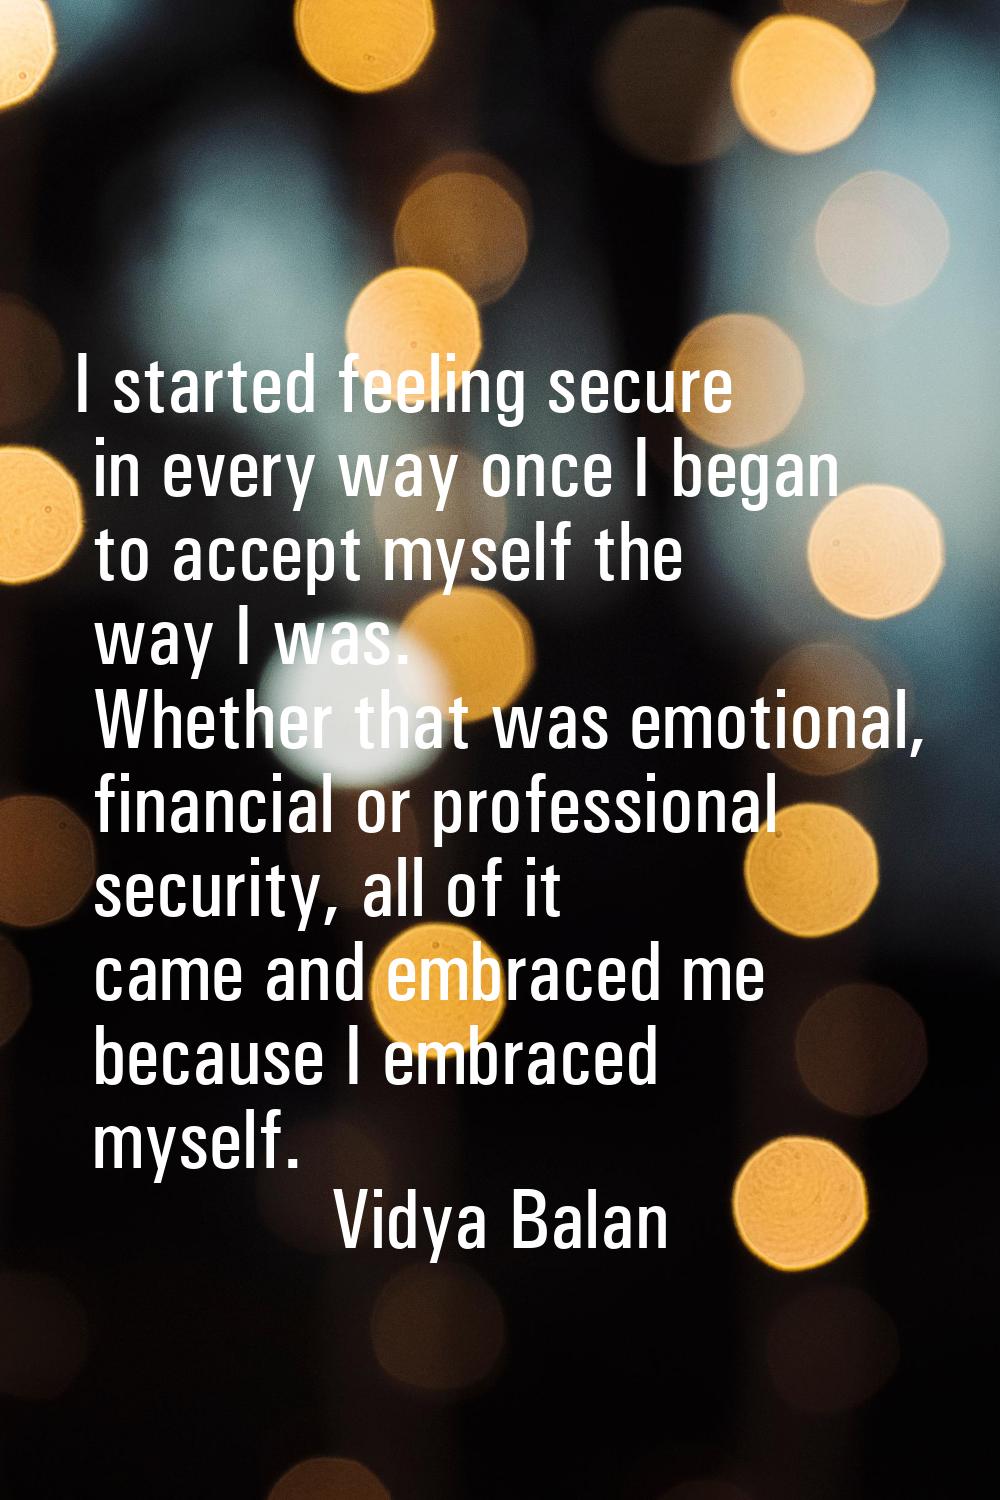 I started feeling secure in every way once I began to accept myself the way I was. Whether that was